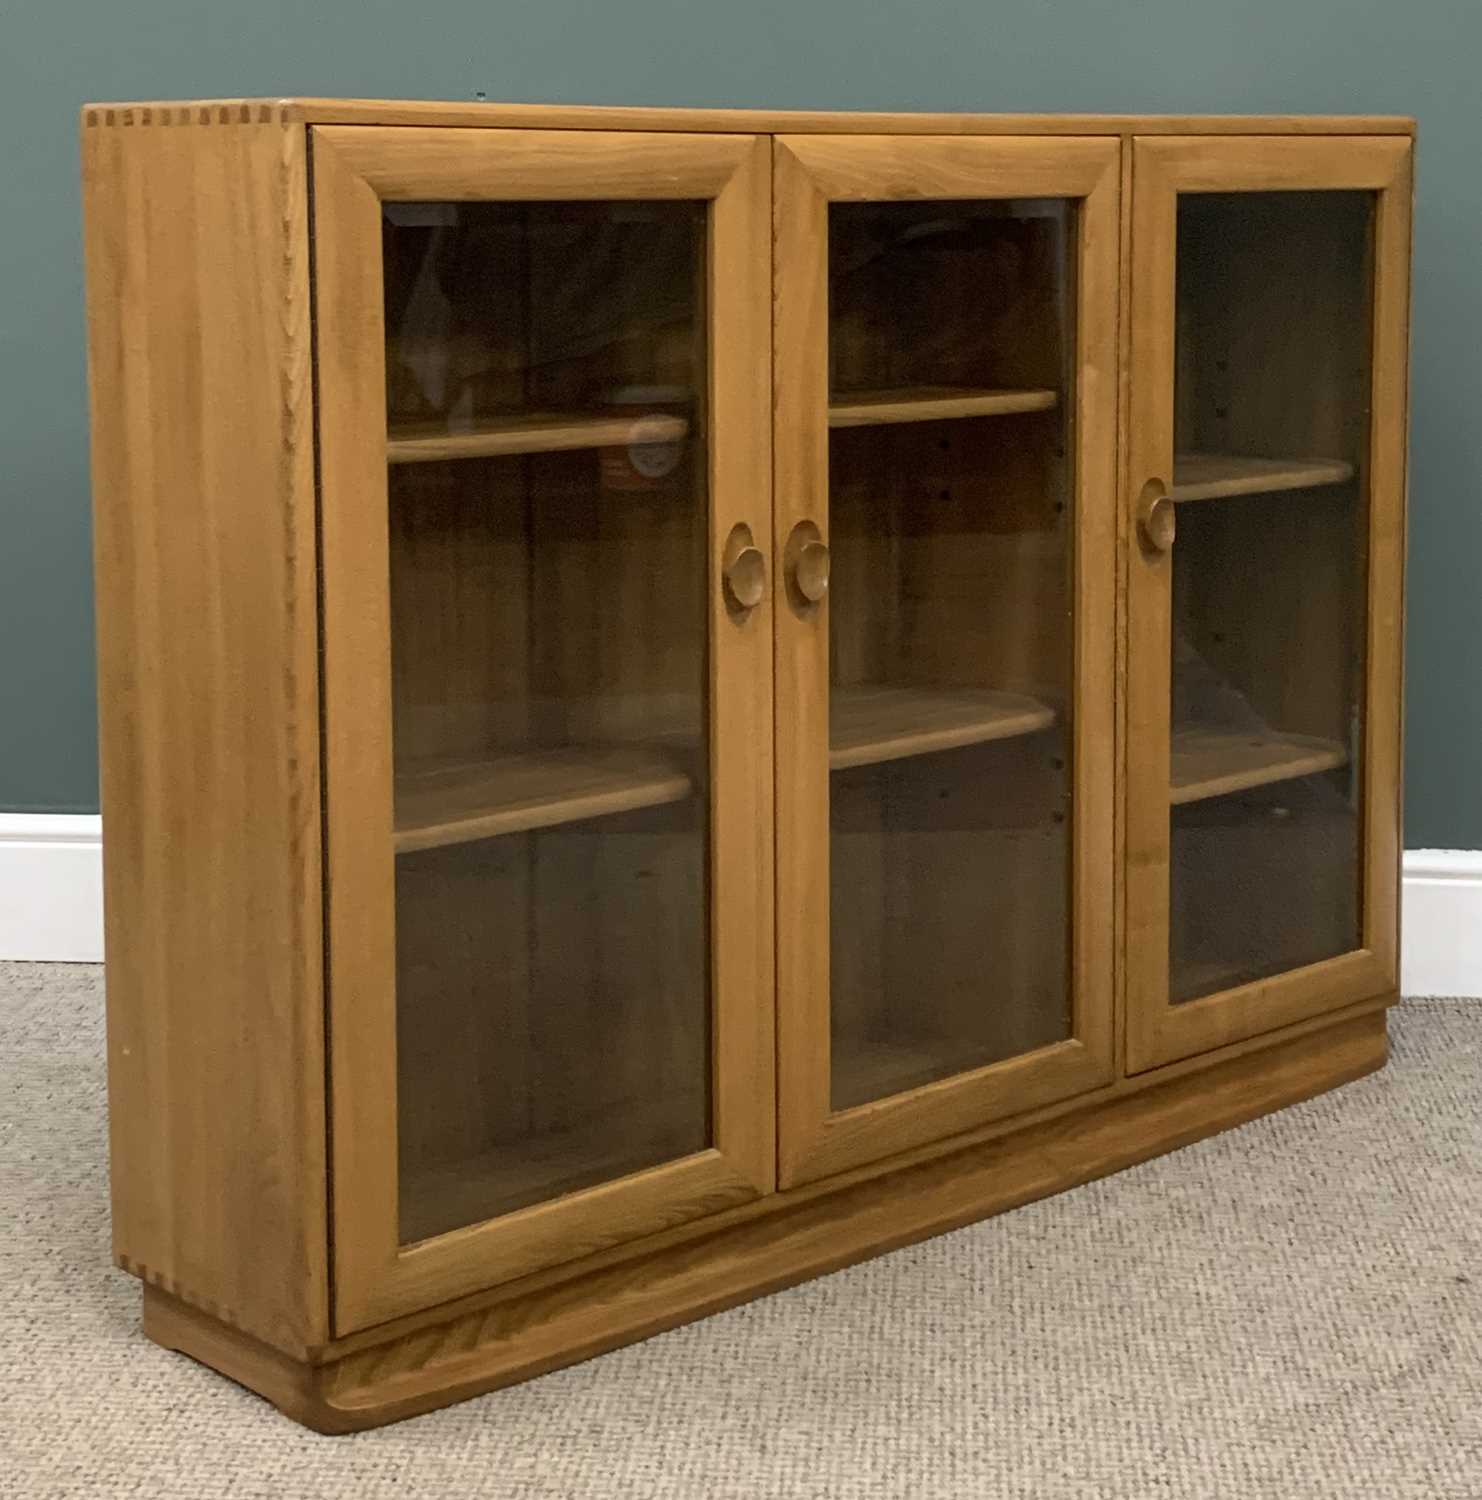 LIGHT ERCOL THREE DOOR BOOKCASE, 97 (h) x 136 (w) x 29 (d) cms Provenance: Private collection - Image 4 of 7